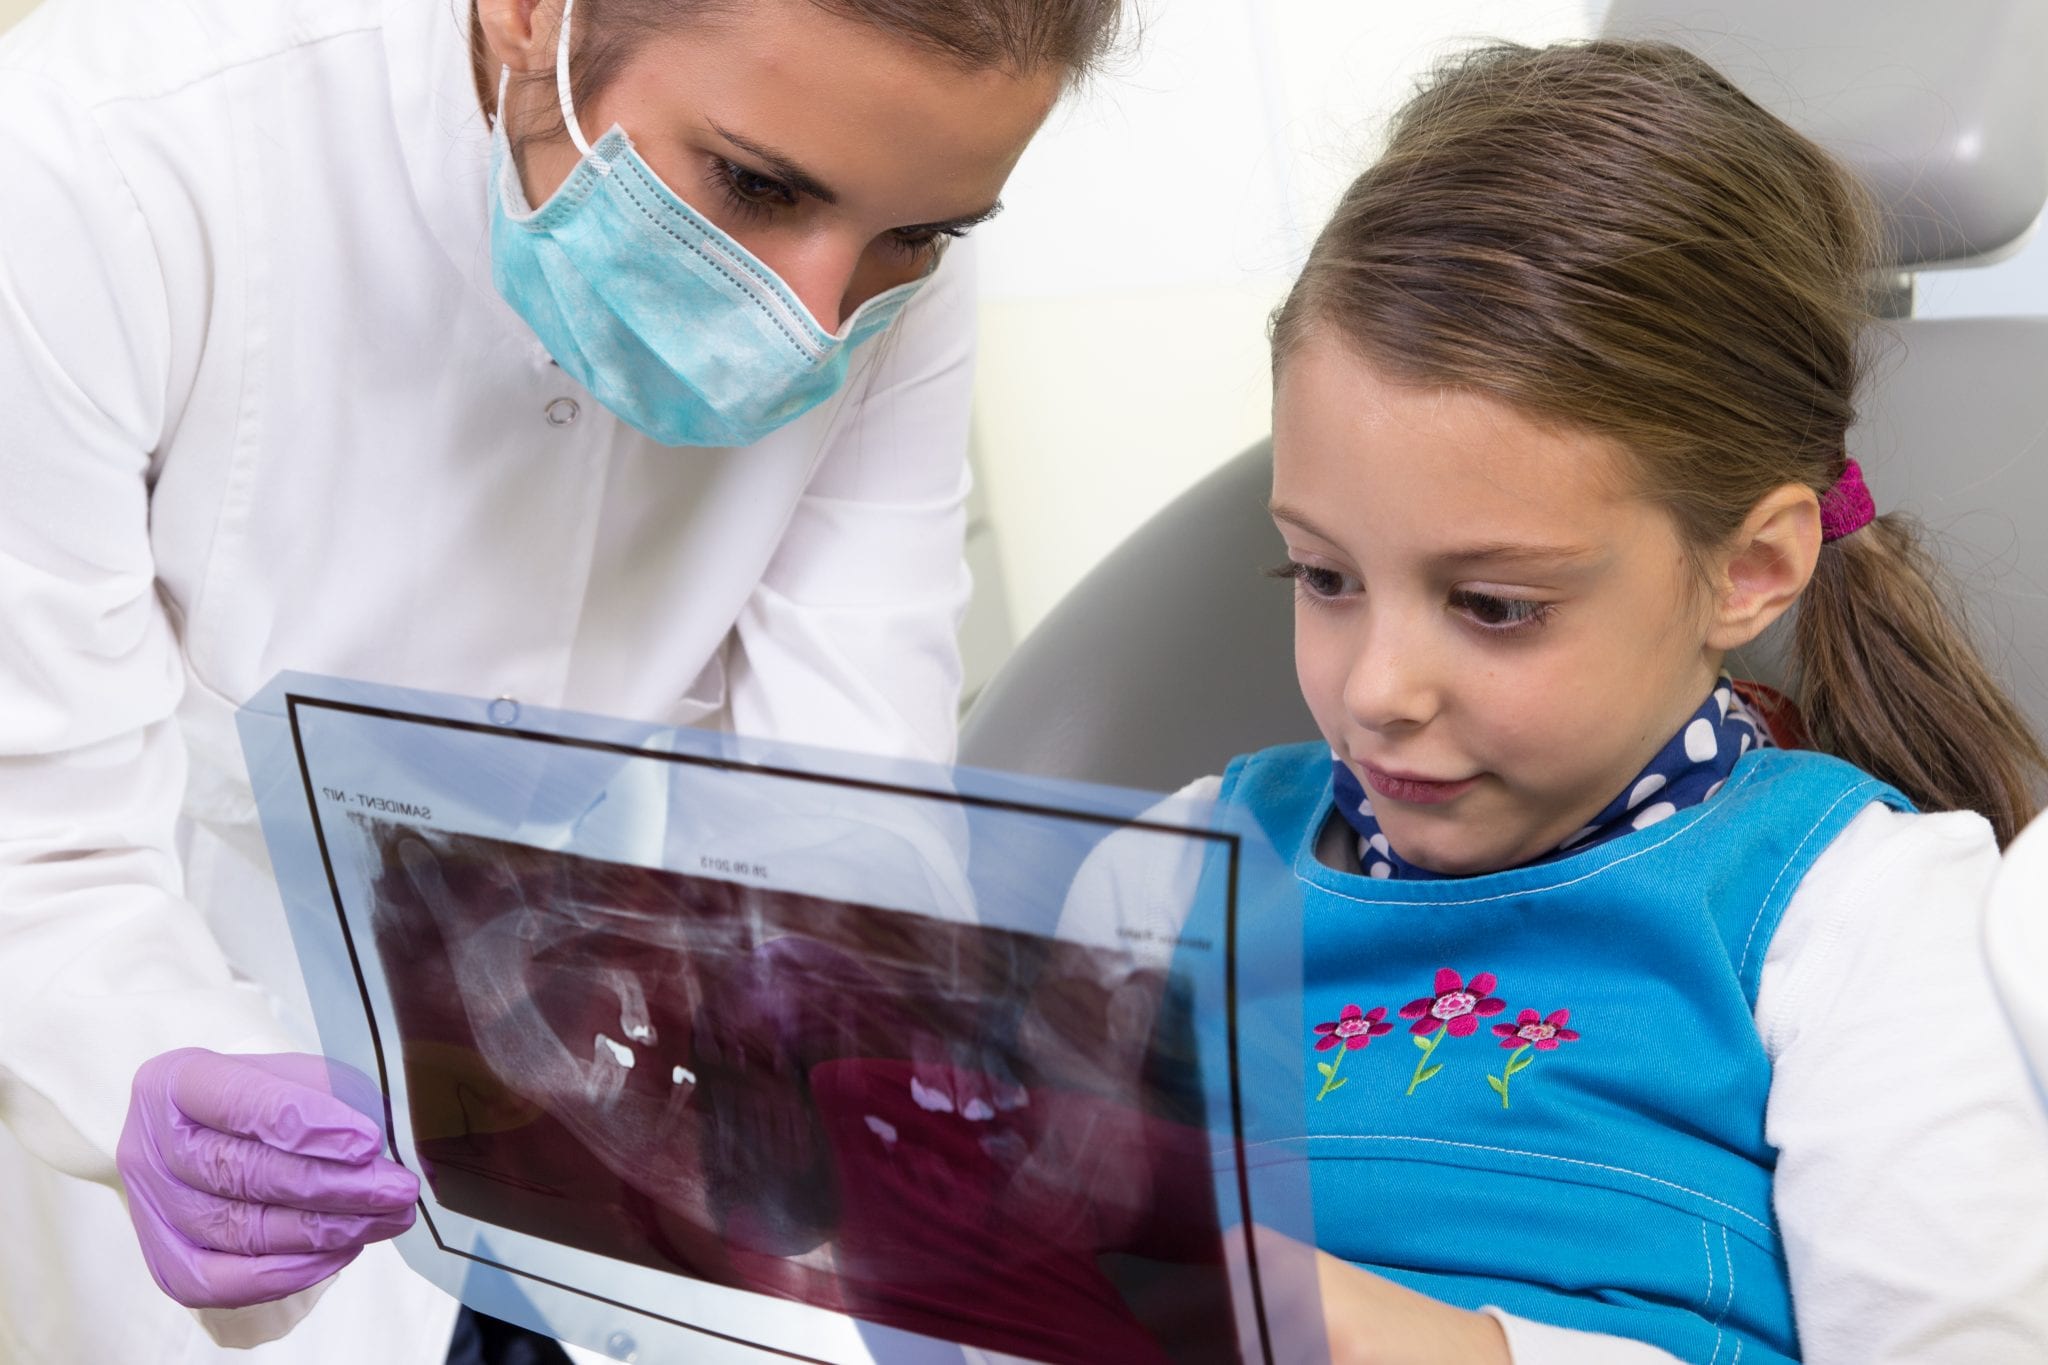 Response to improvements in child dental health